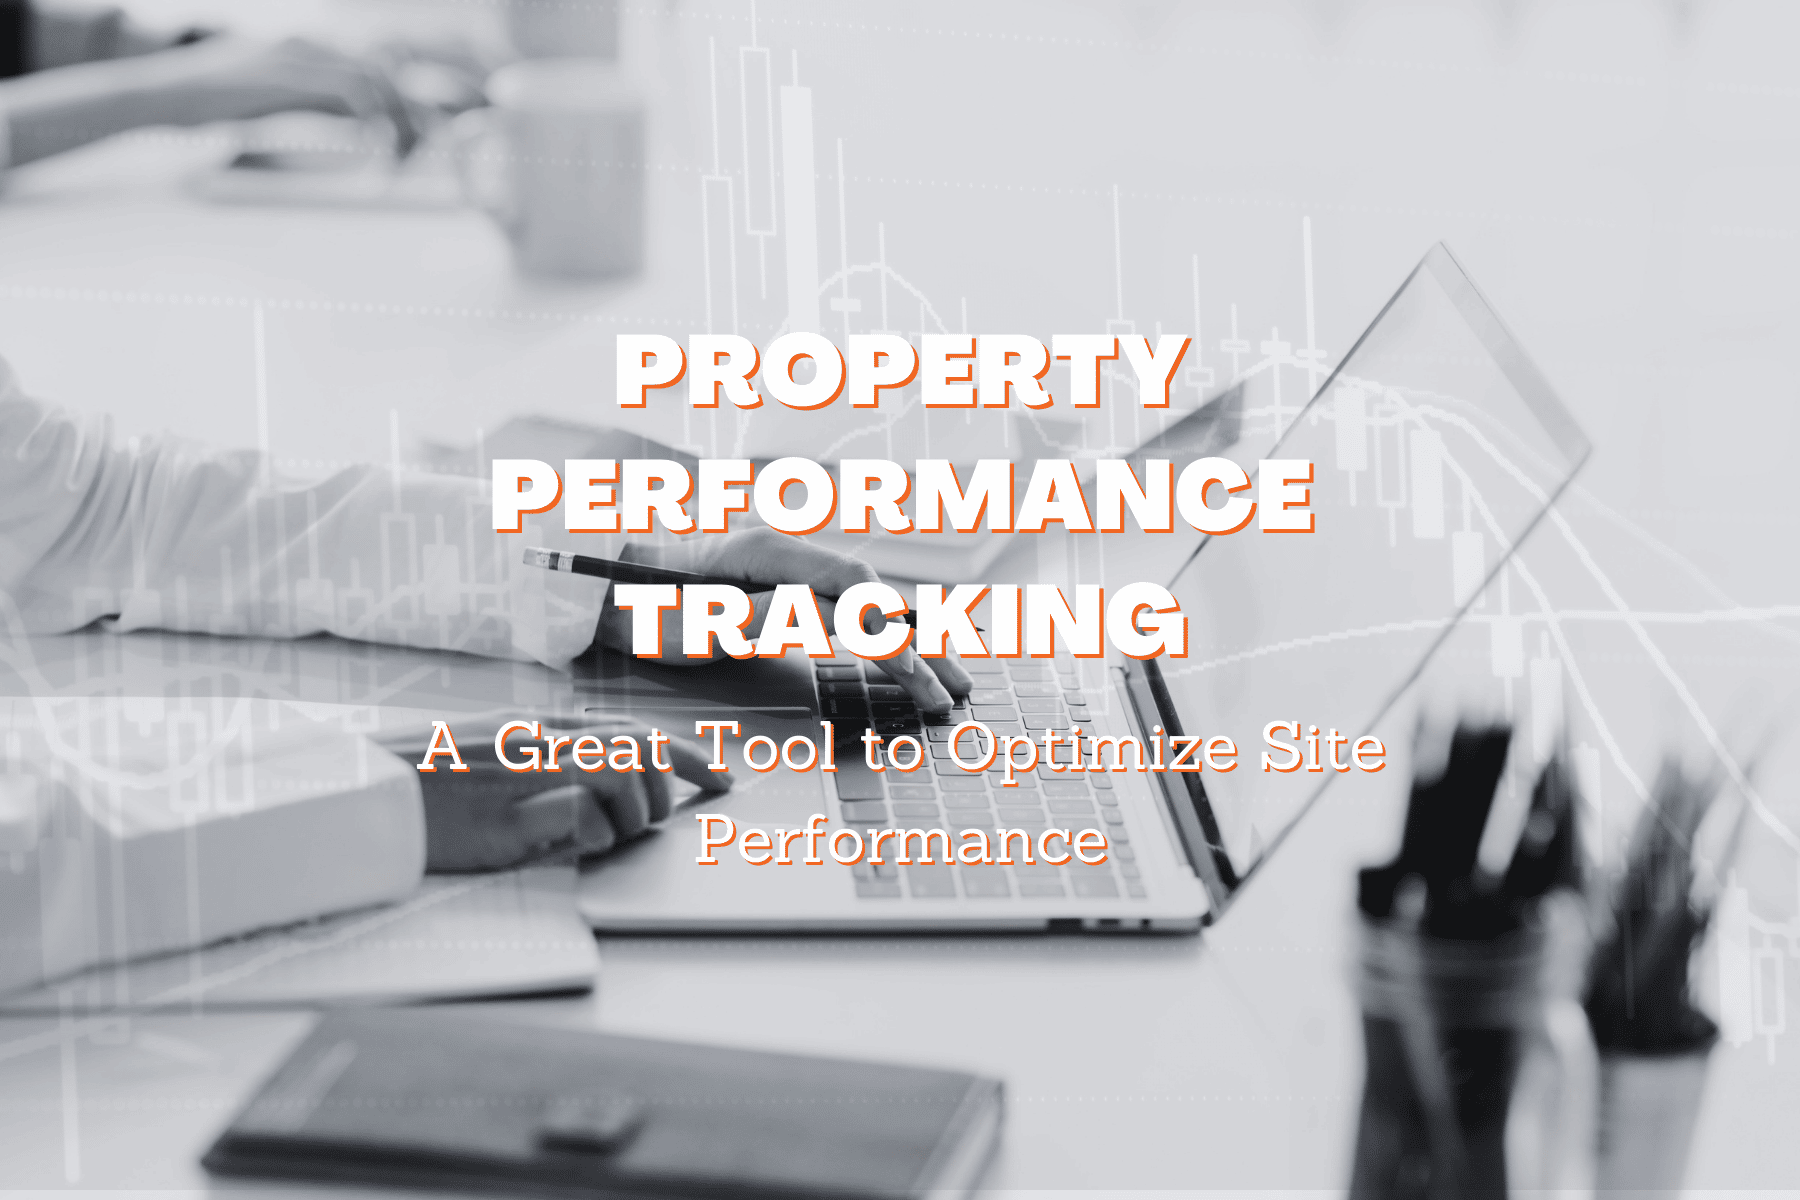 Property Performance Tracking: A Great Tool to Optimize Site Performance